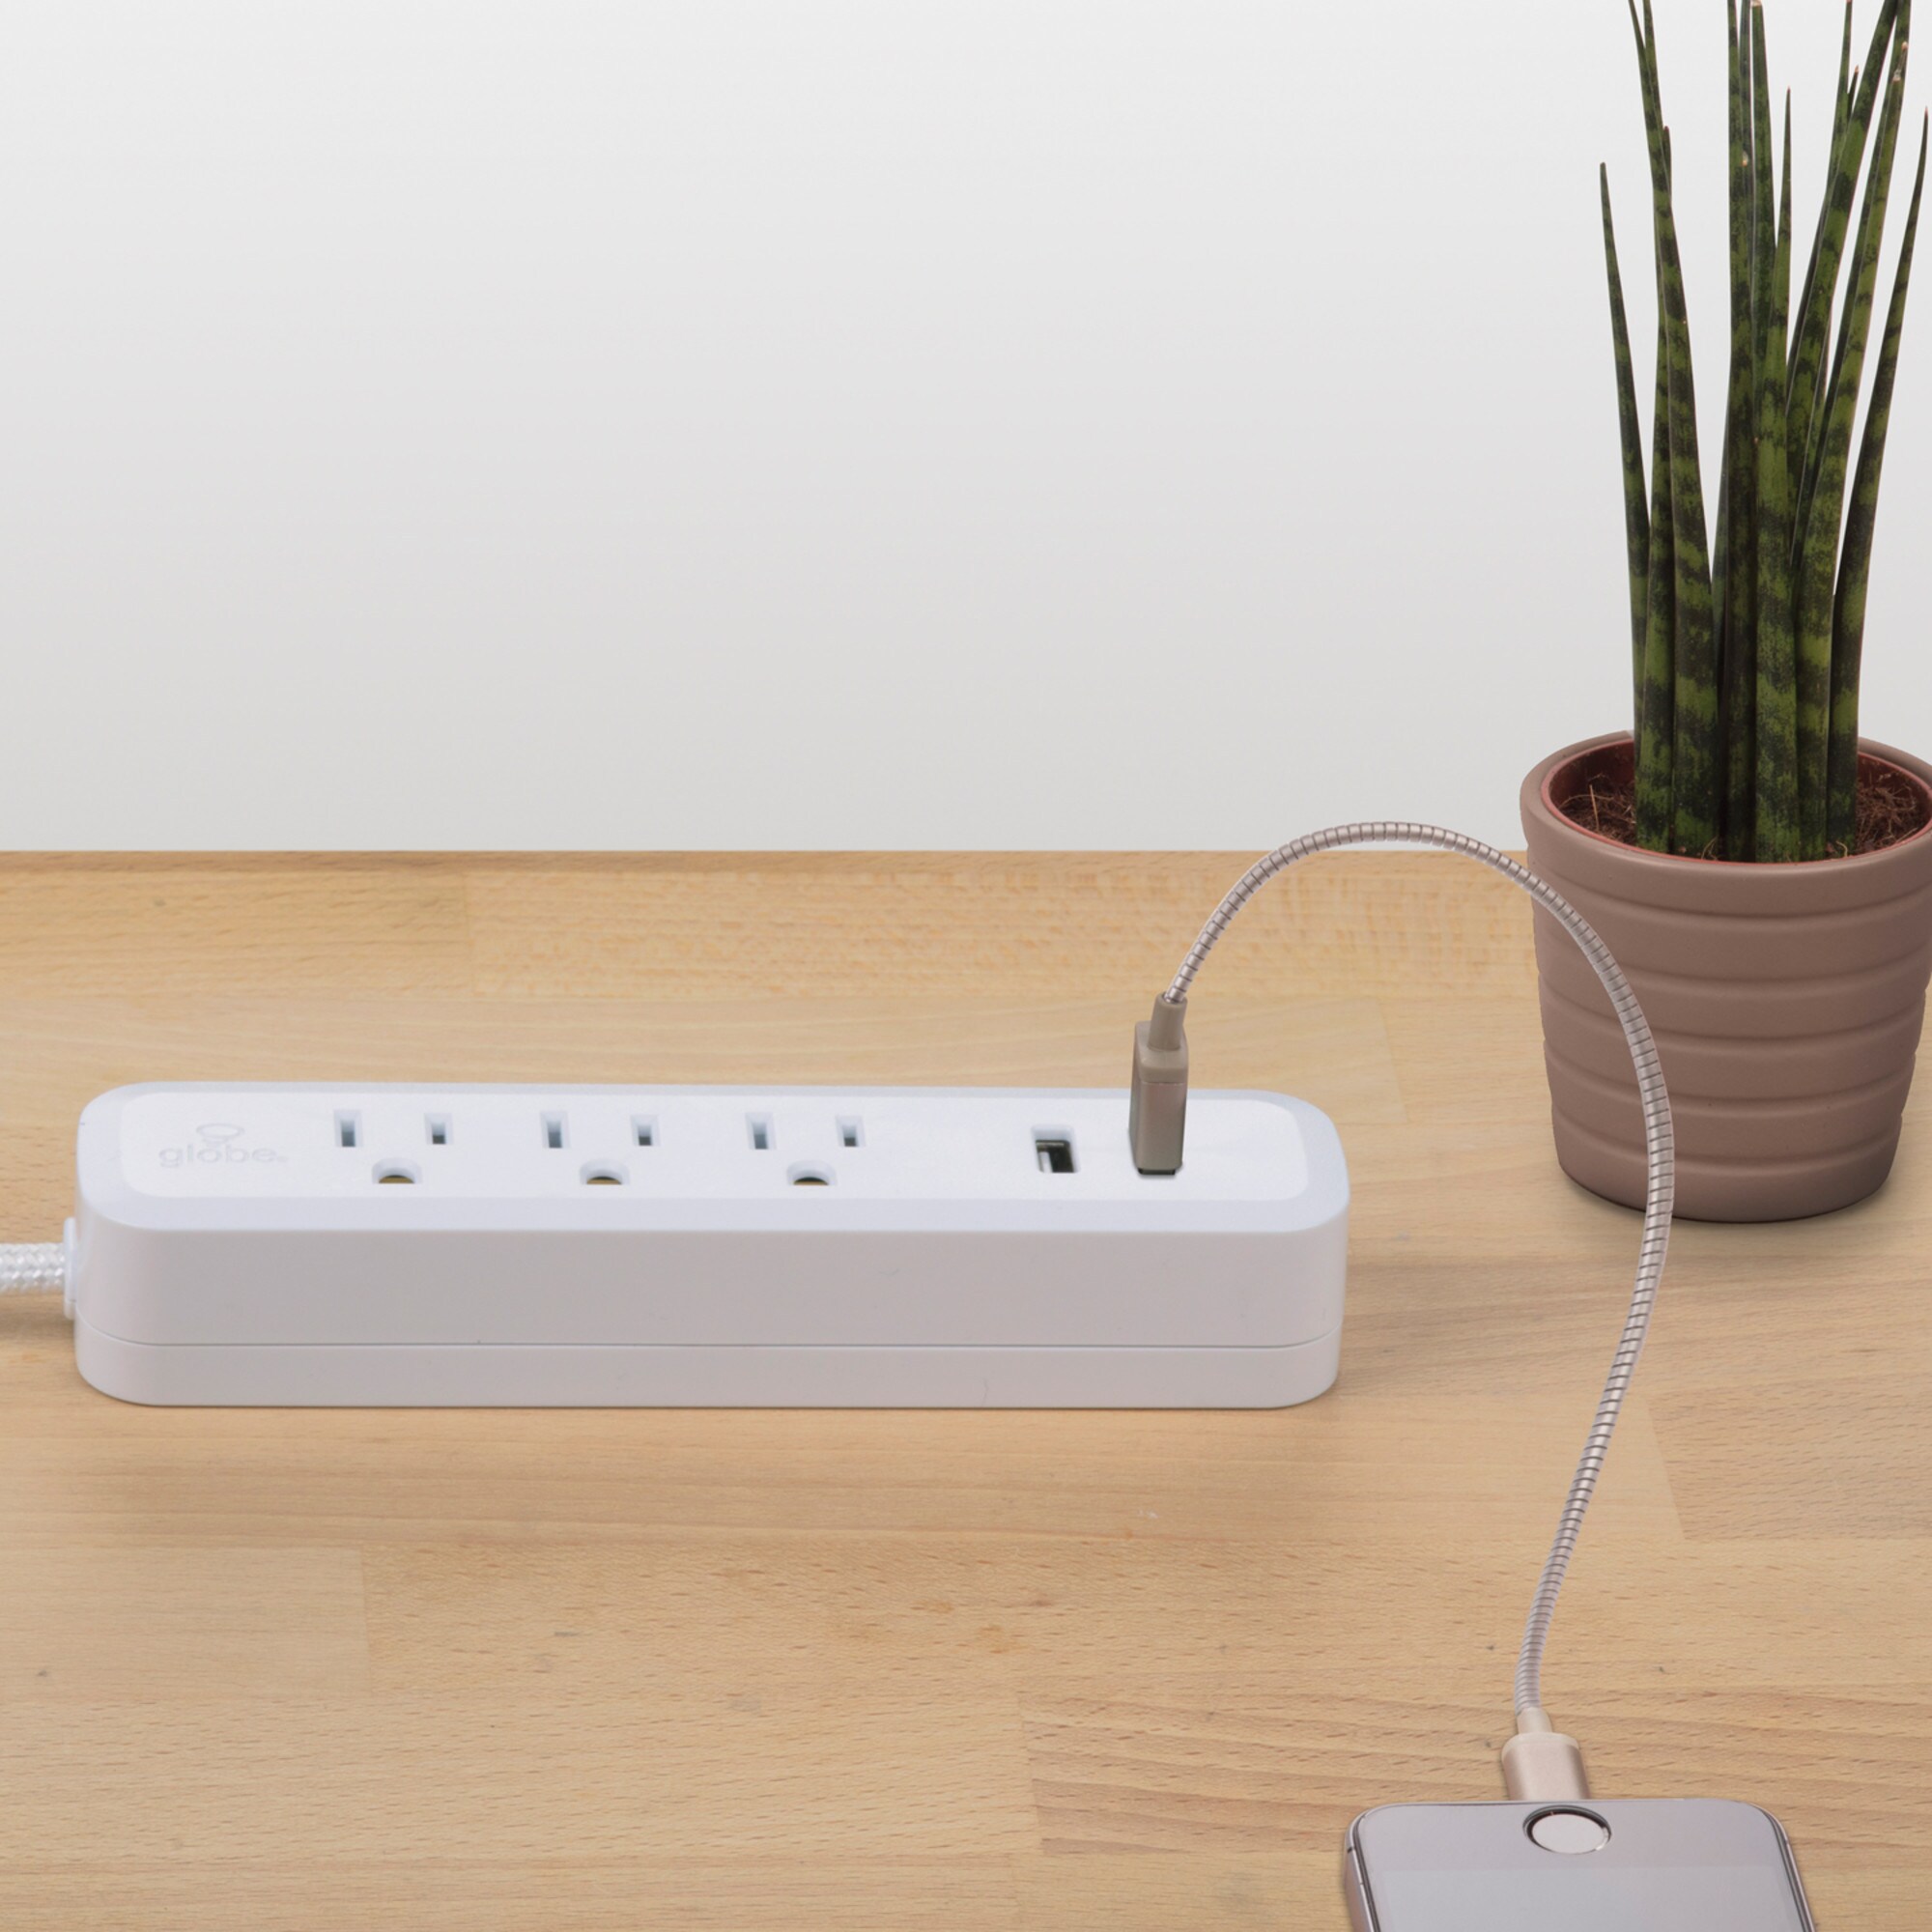 TP-Link Kasa Smart HS300 - Kasa Smart Plug Power Strip - 6 Controlled Smart  Outlets and 3 USB Ports - Offy Store